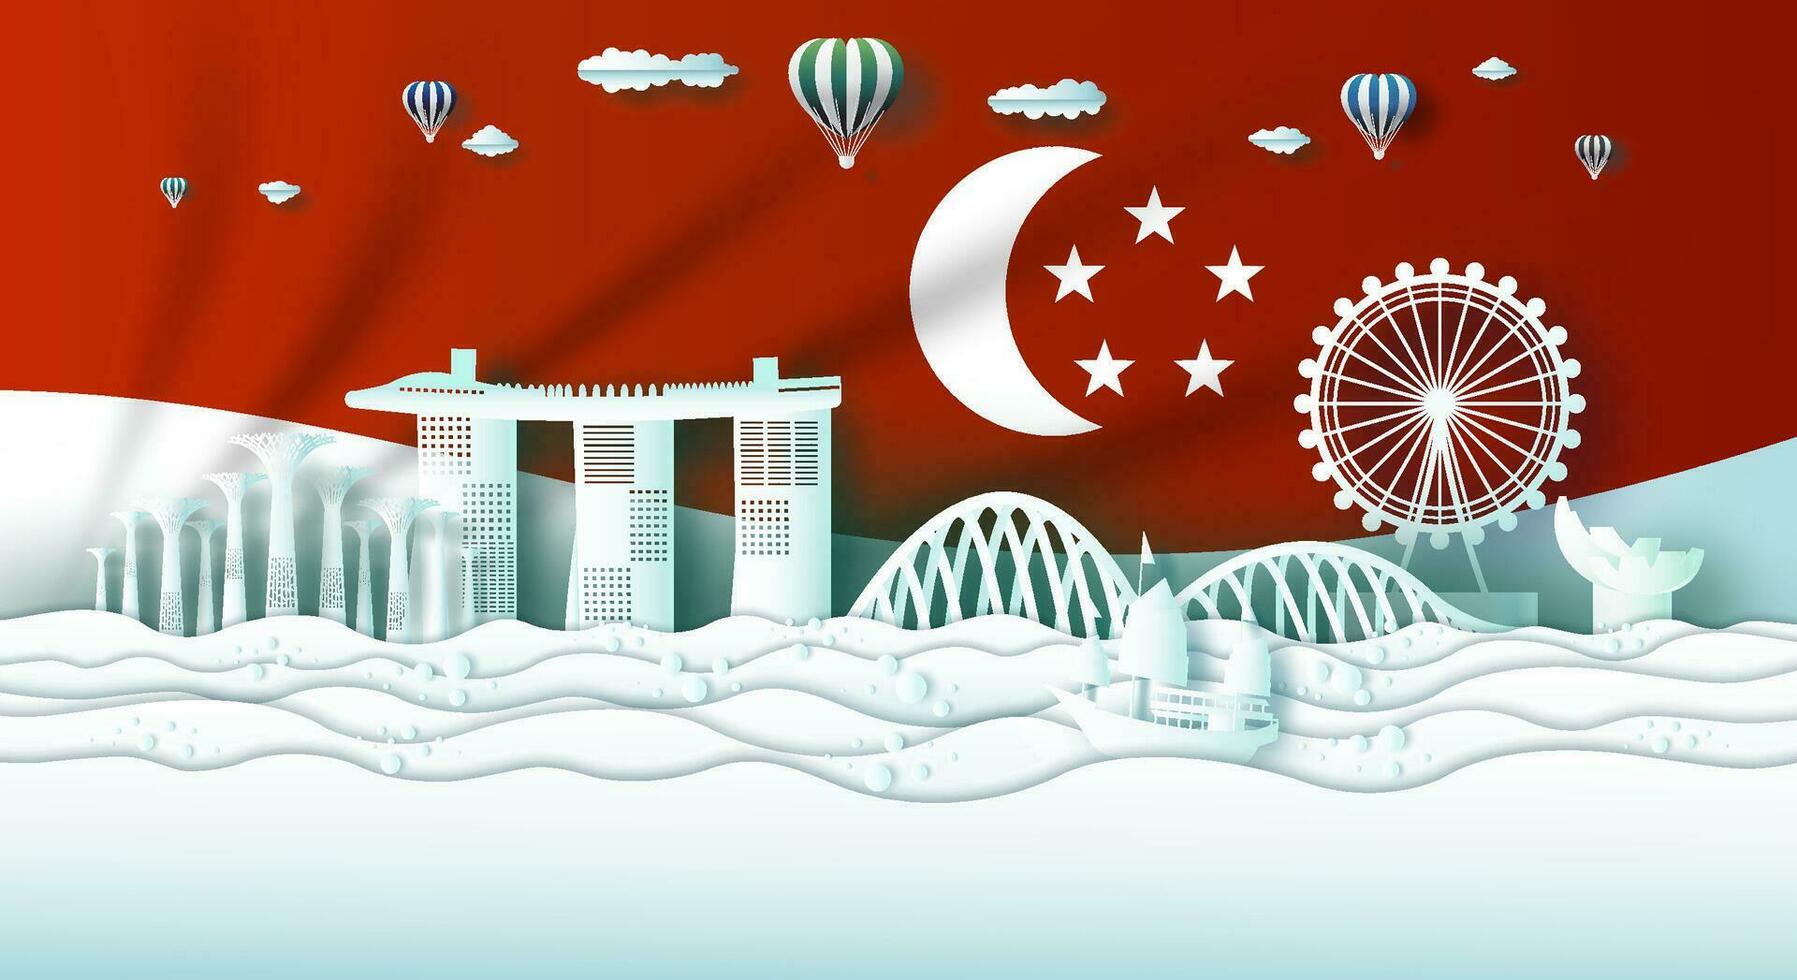 Travel Singapore top world famous modern city and central architecture. vector